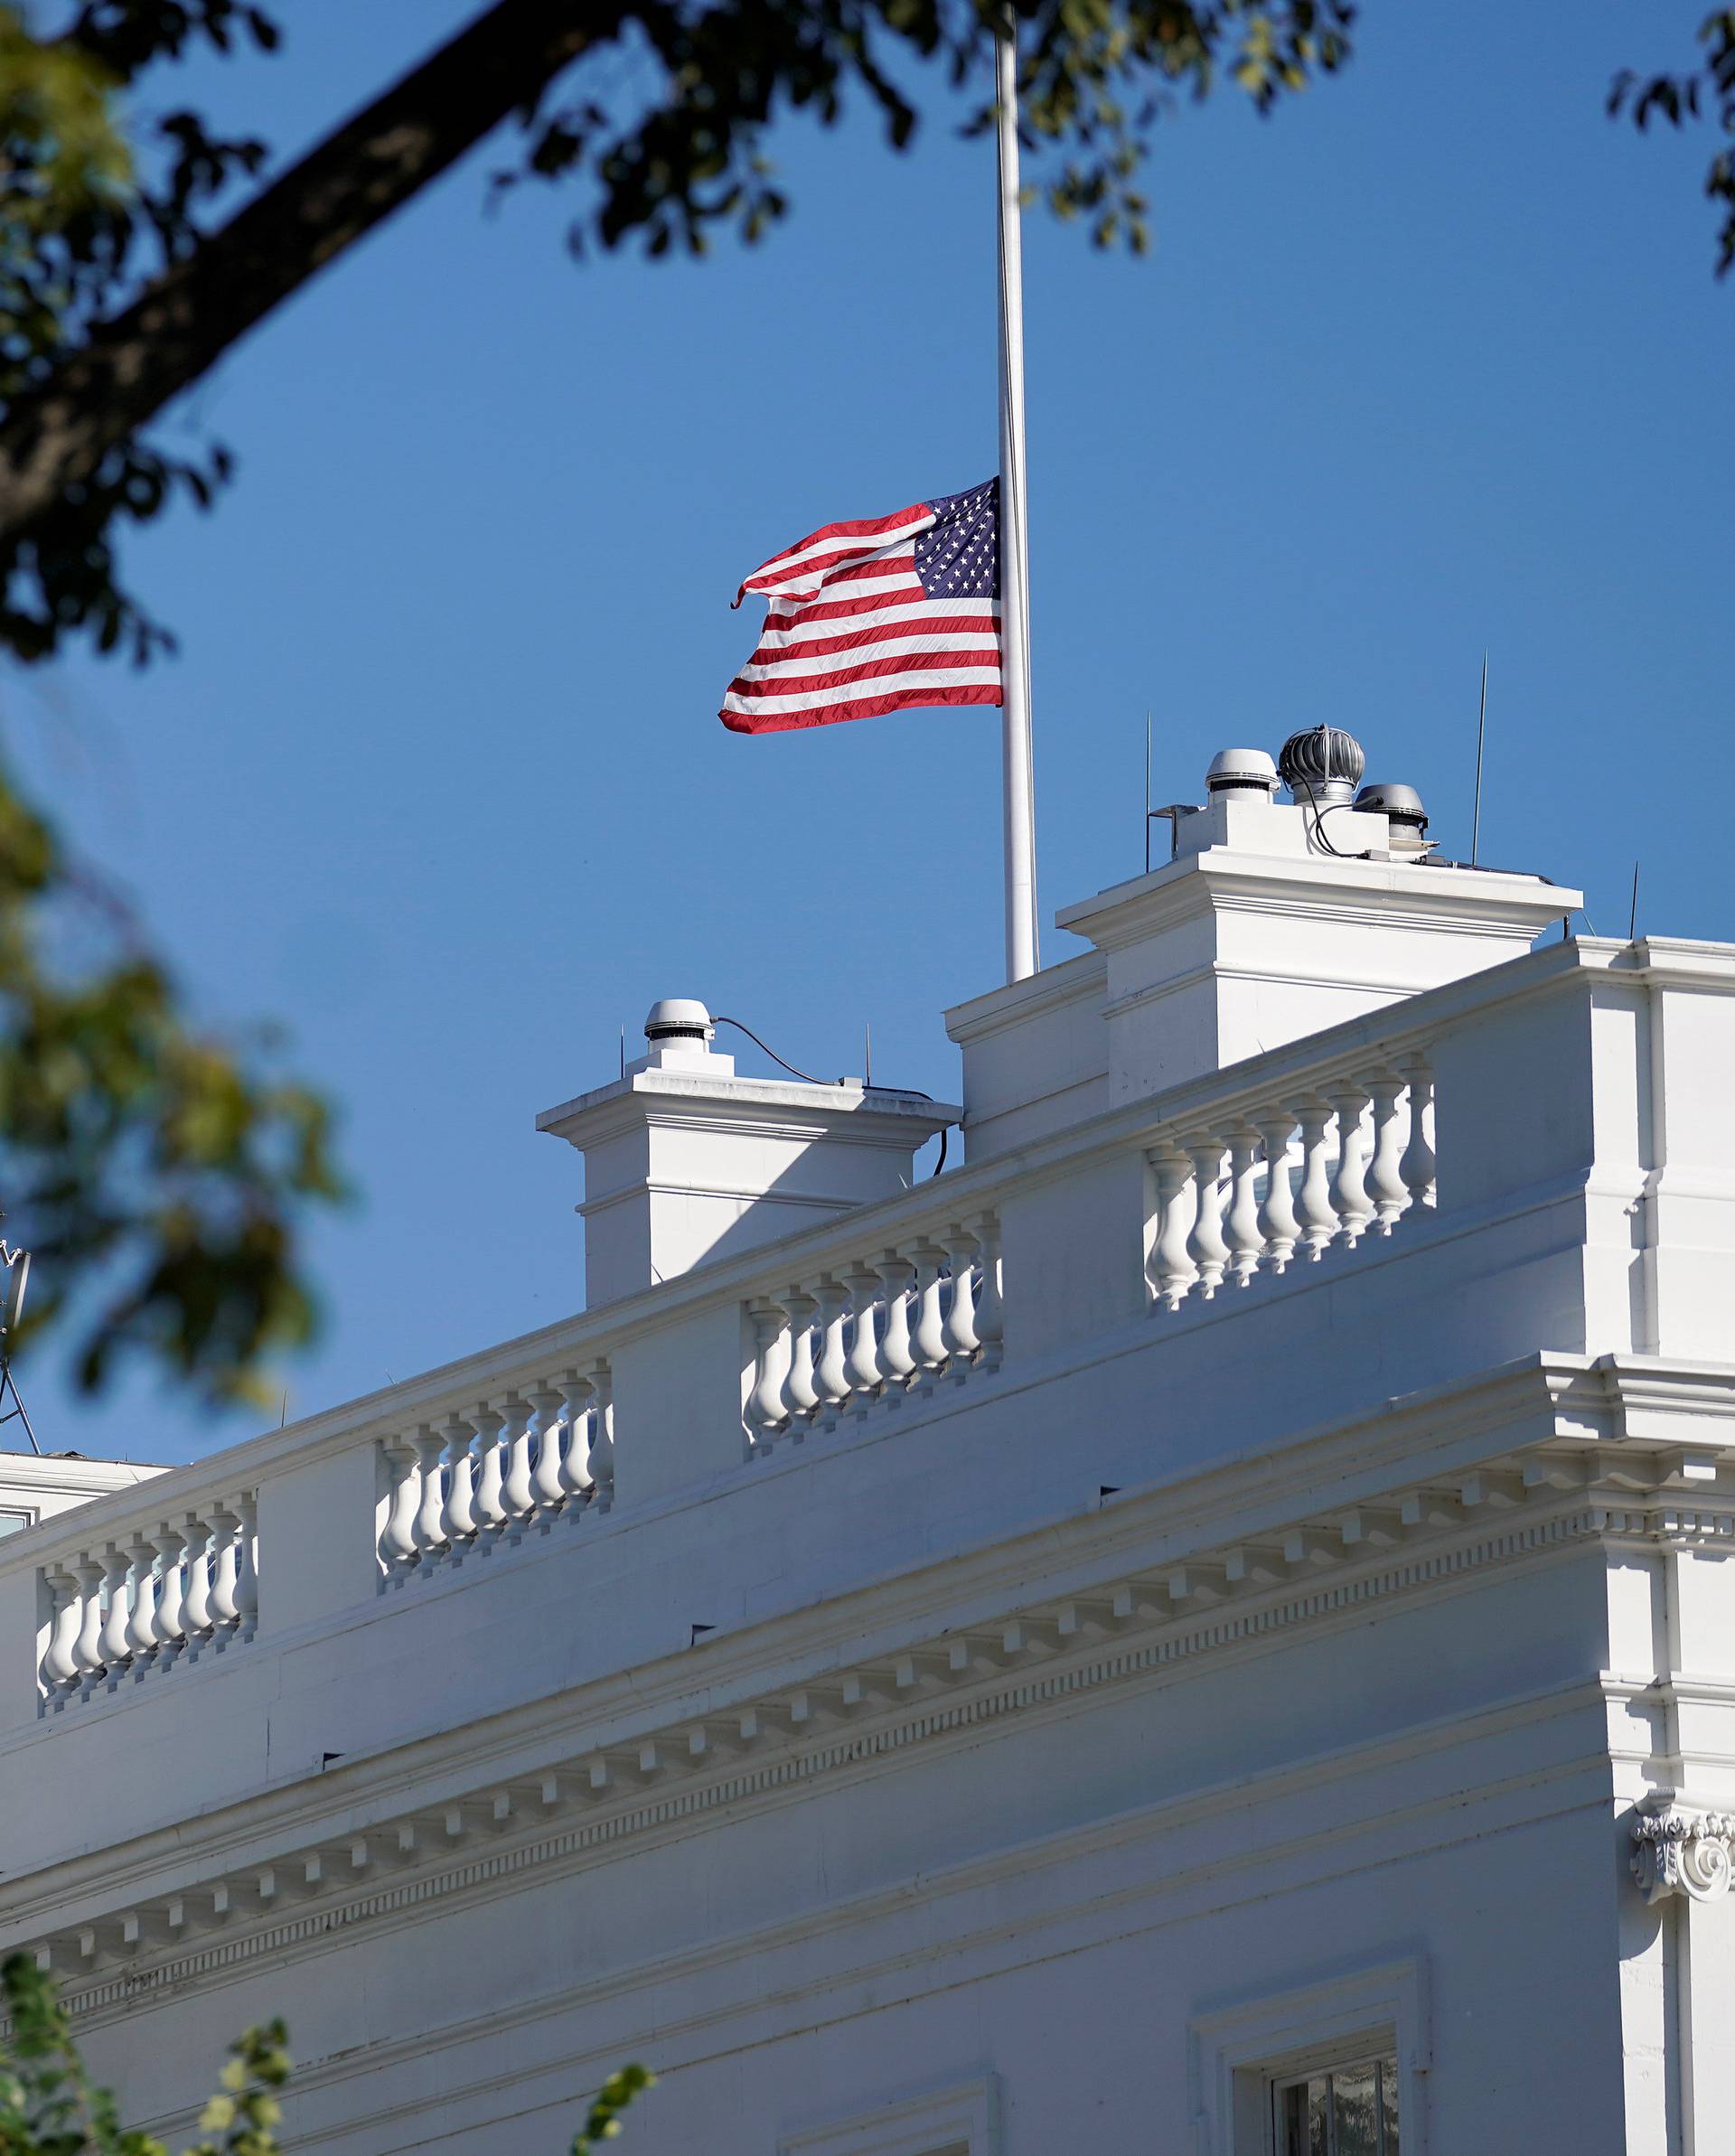 The U.S. flag flies at half-staff in the wake of a mass shooting in Las Vegas at the White House in Washington